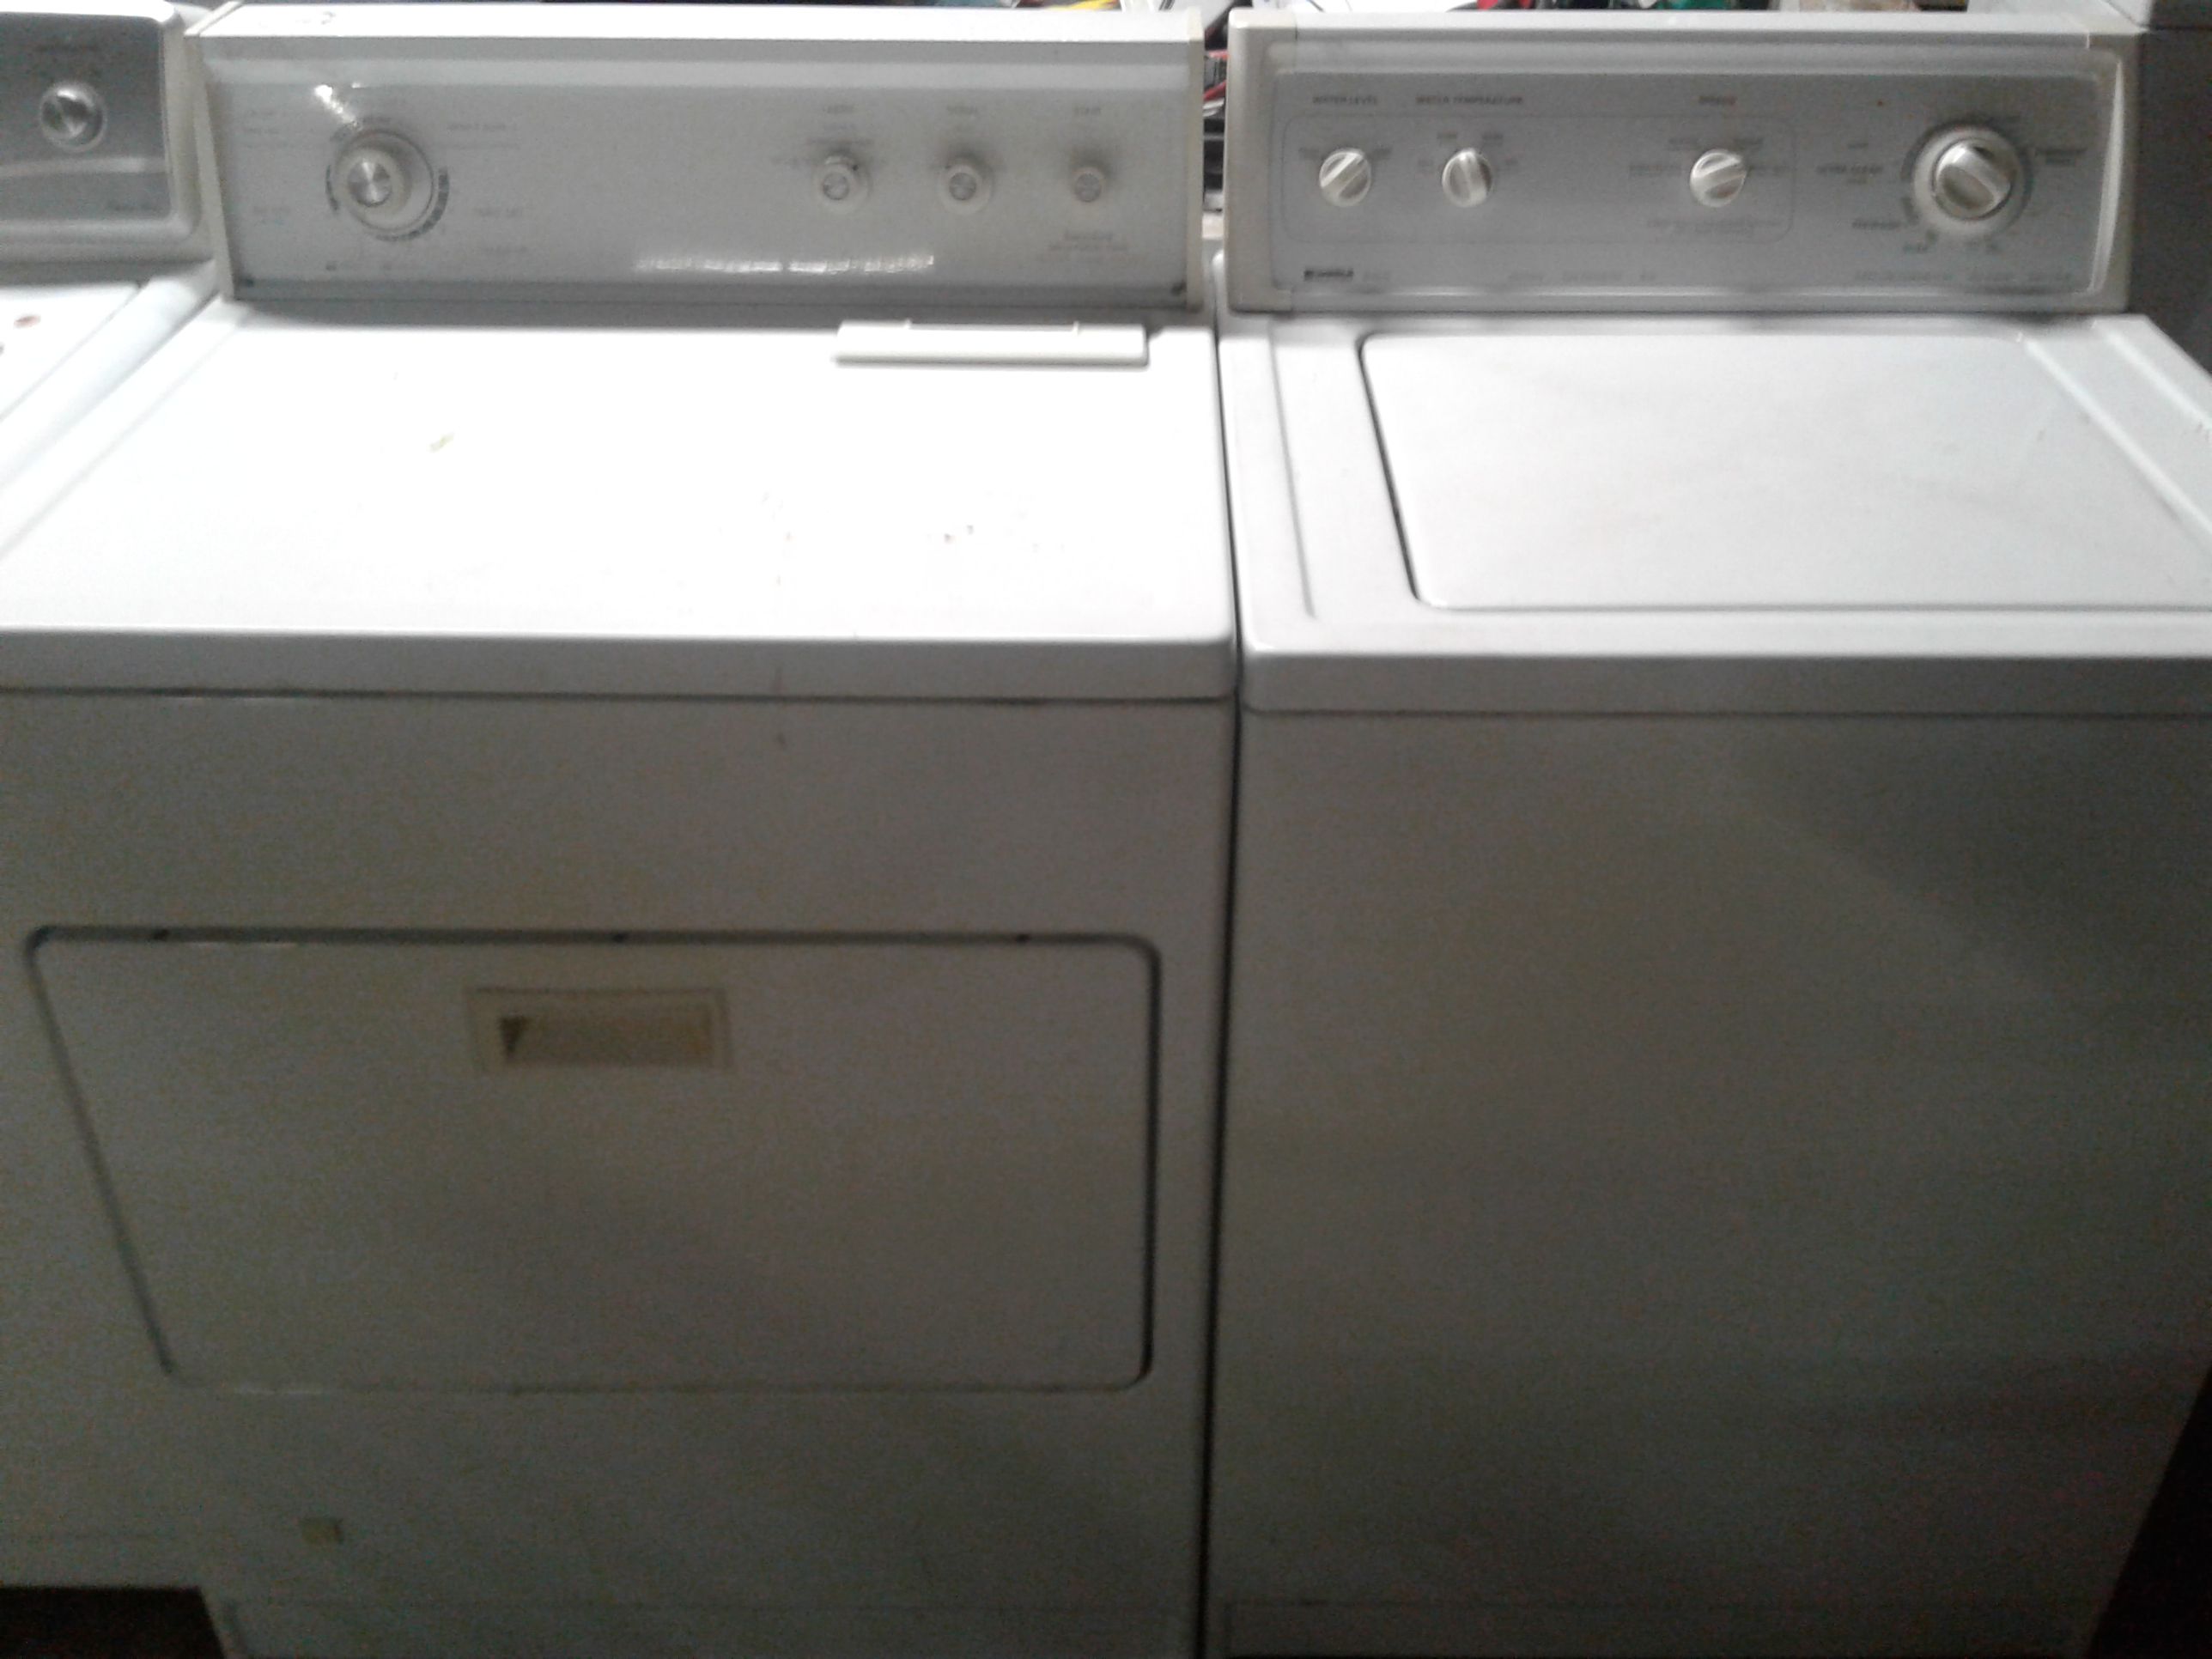 Kenmore set gas dryer and washer both work great